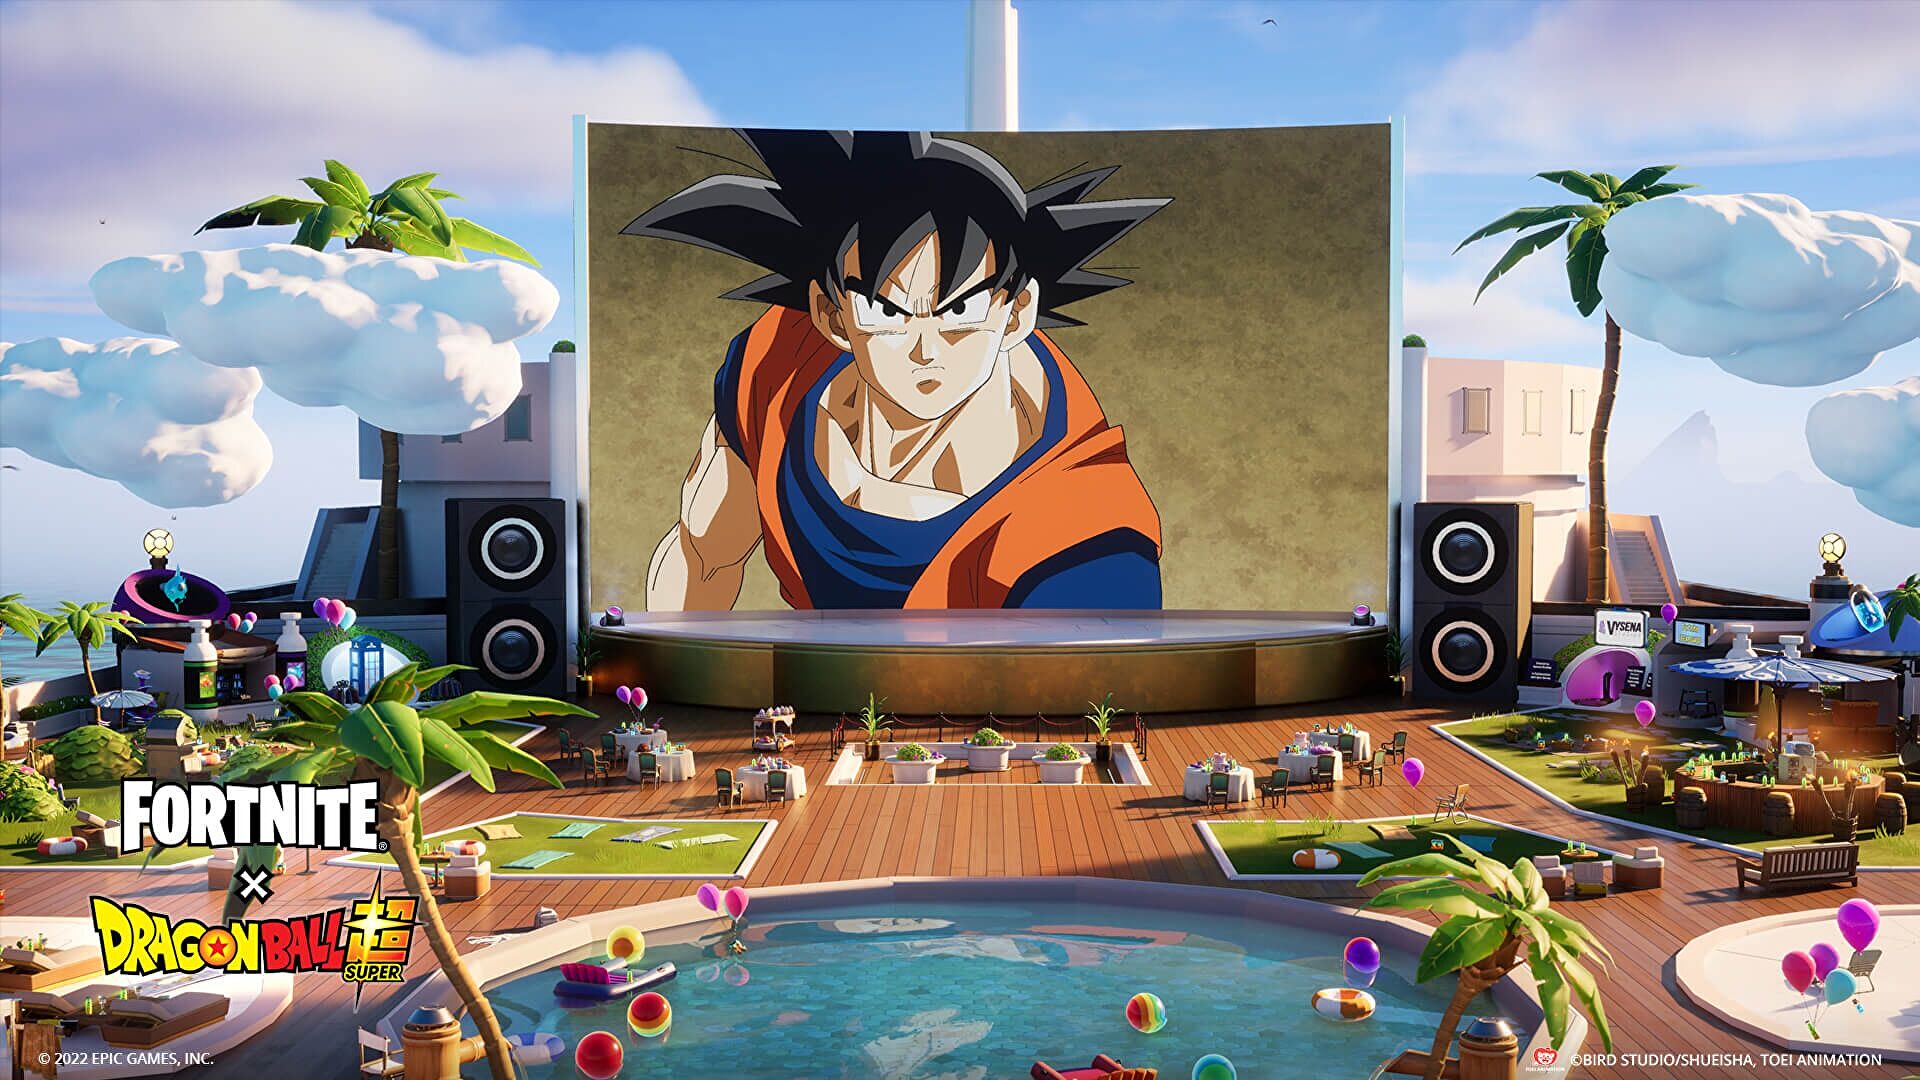 Fortnite x Dragon Ball crossover event adds Goku Vegeta to the game today